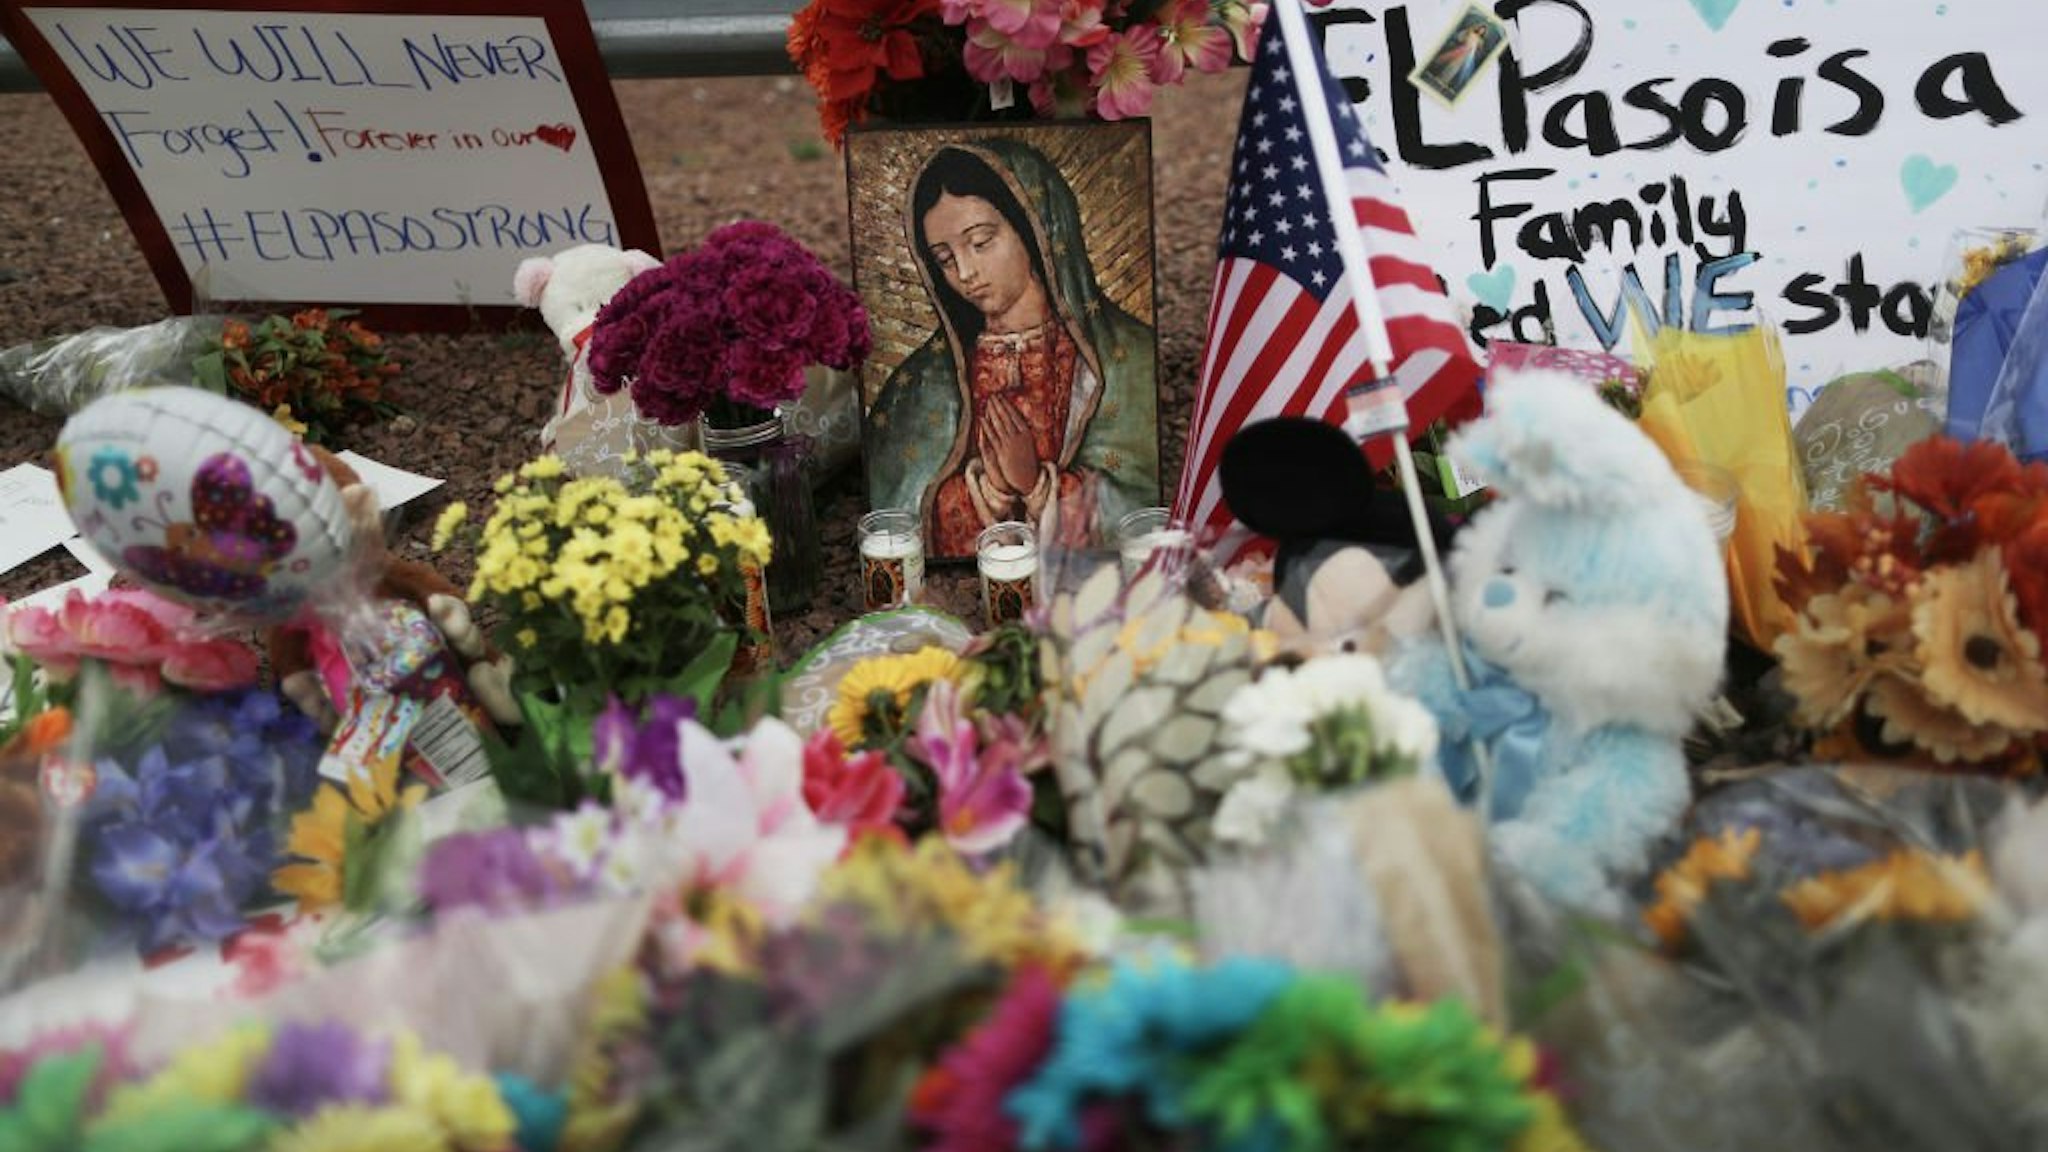 Flowers and mementos are seen at a makeshift memorial outside Walmart, near the scene of a mass shooting which left at least 20 people dead, on August 4, 2019 in El Paso, Texas.